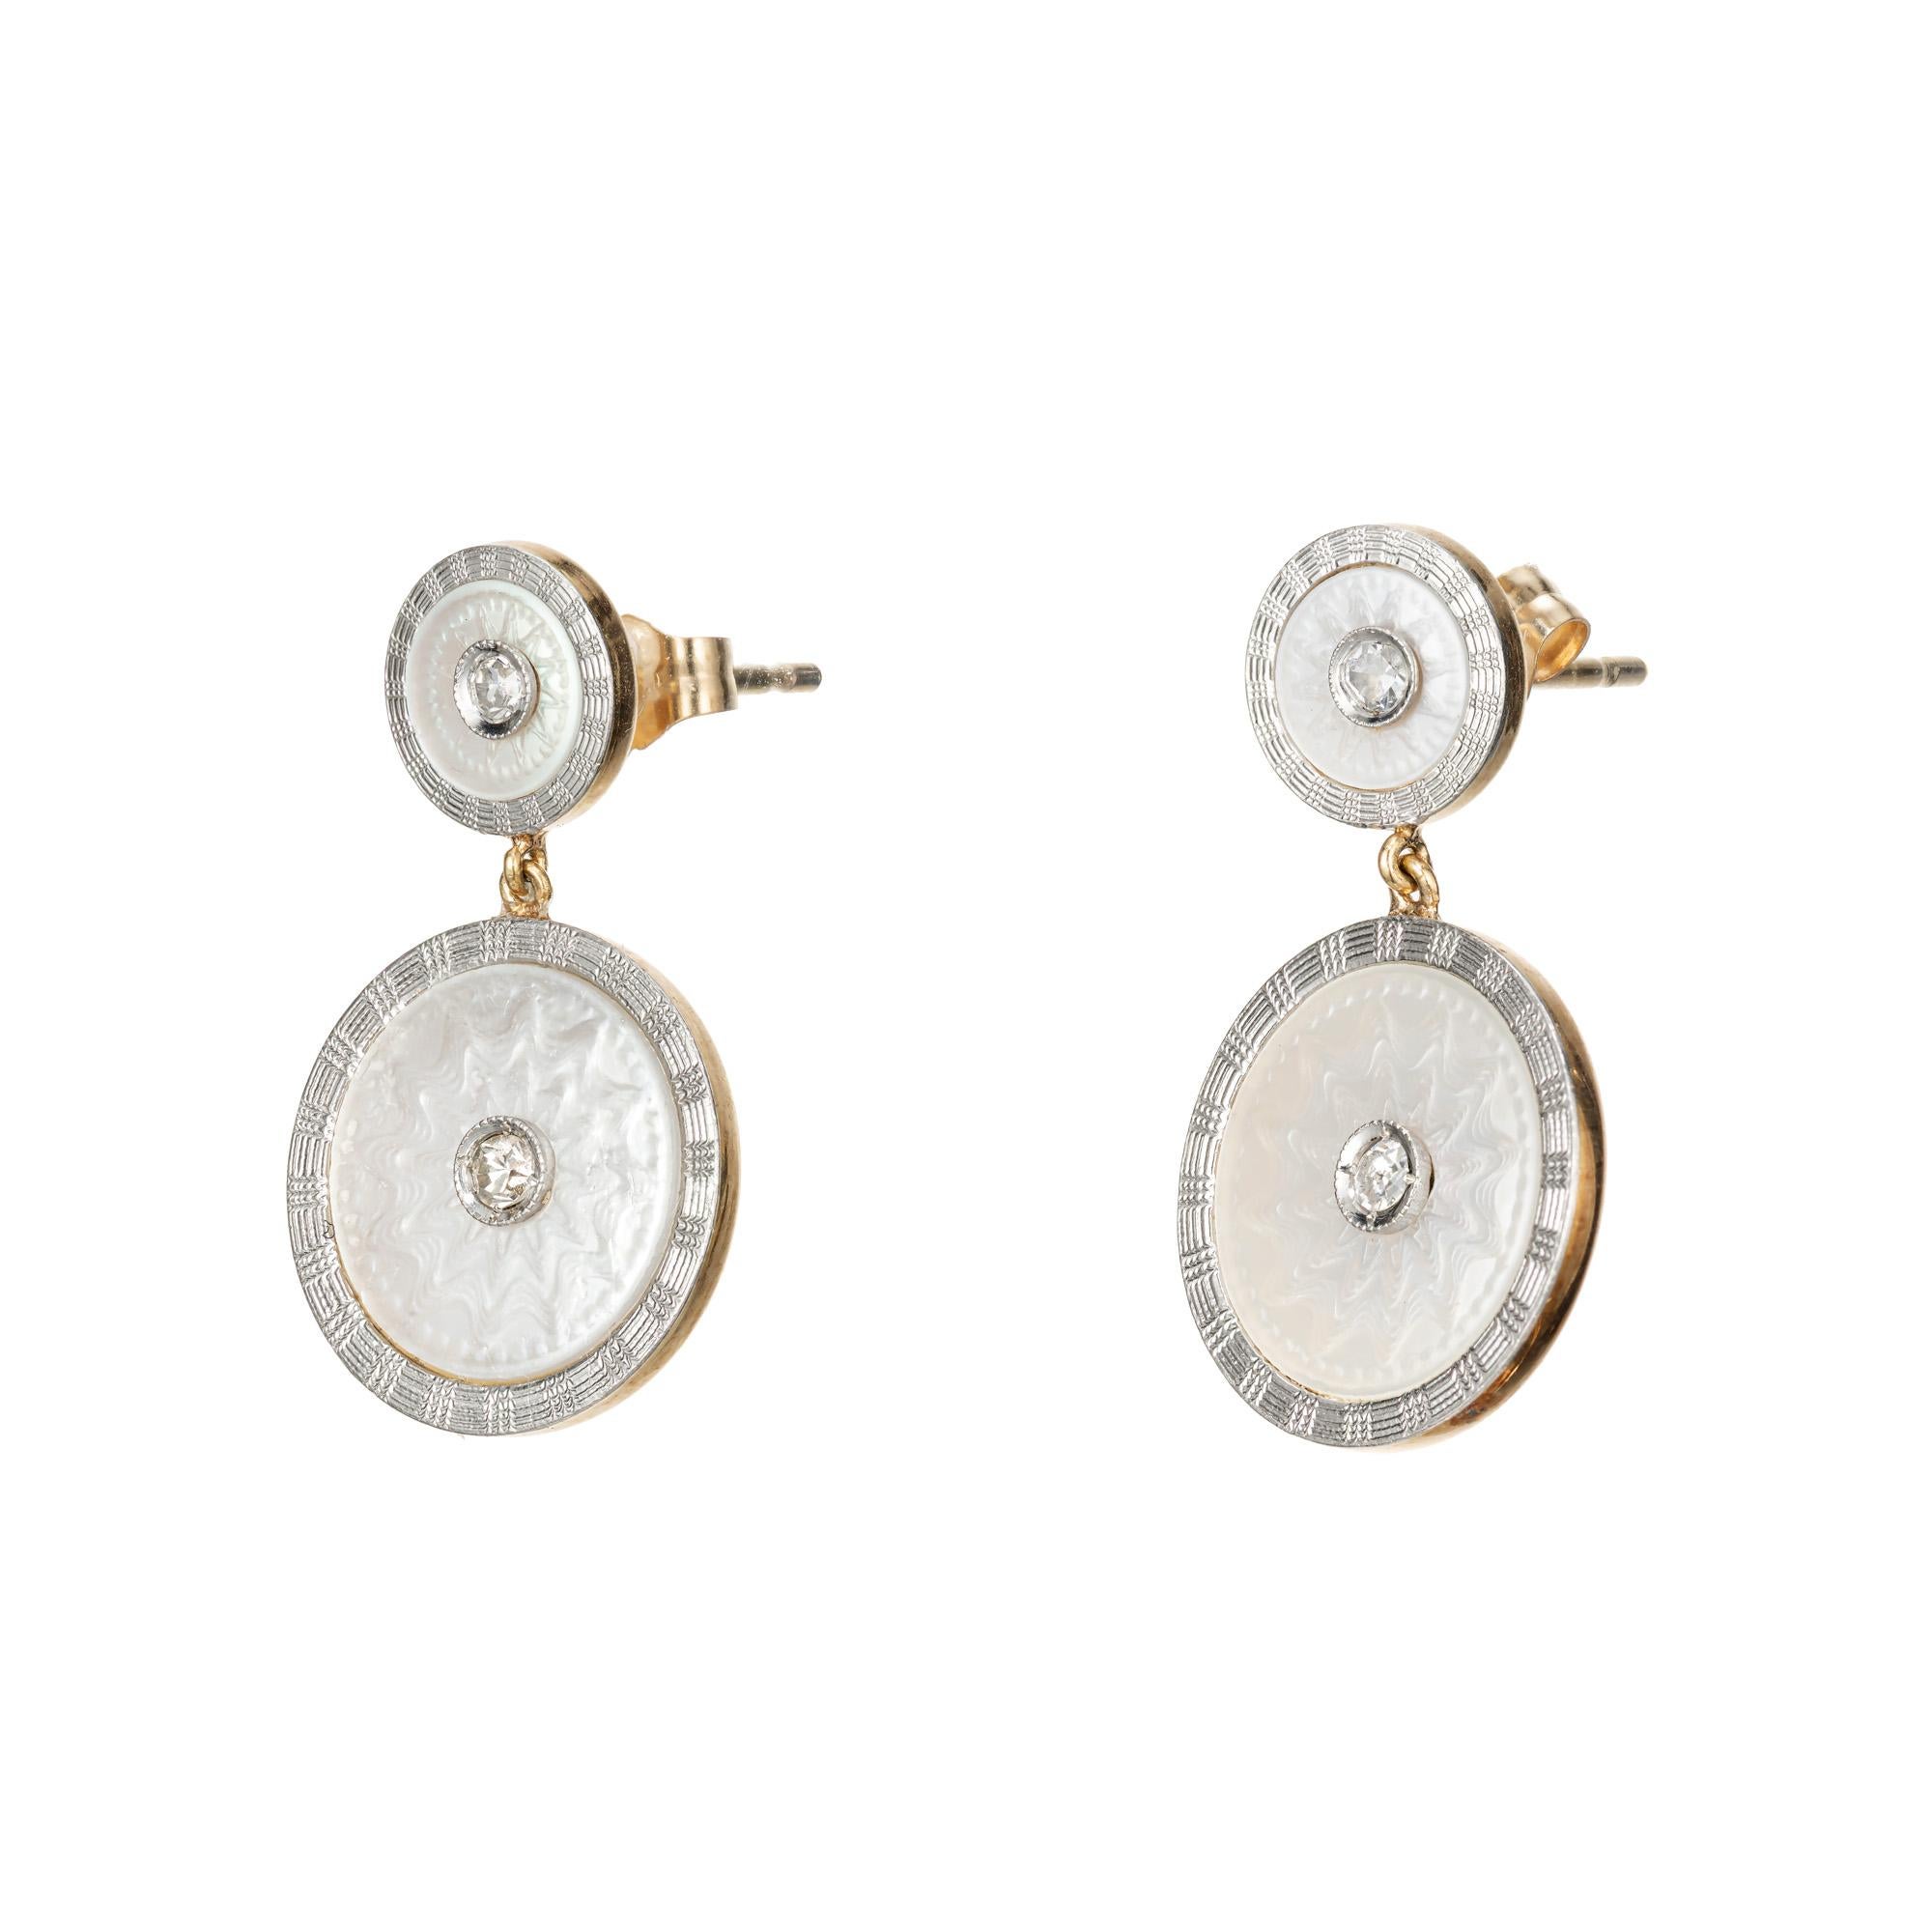 Early 1900's Beautifully crafted, Carter Gough & Co Platinum, 14k yellow and white gold carved Mother of Pearl dangle earrings. 4 bezel set diamonds set in exquisitely carved Mother of pearl discs, each patterned rims. These unique dangles contain 3